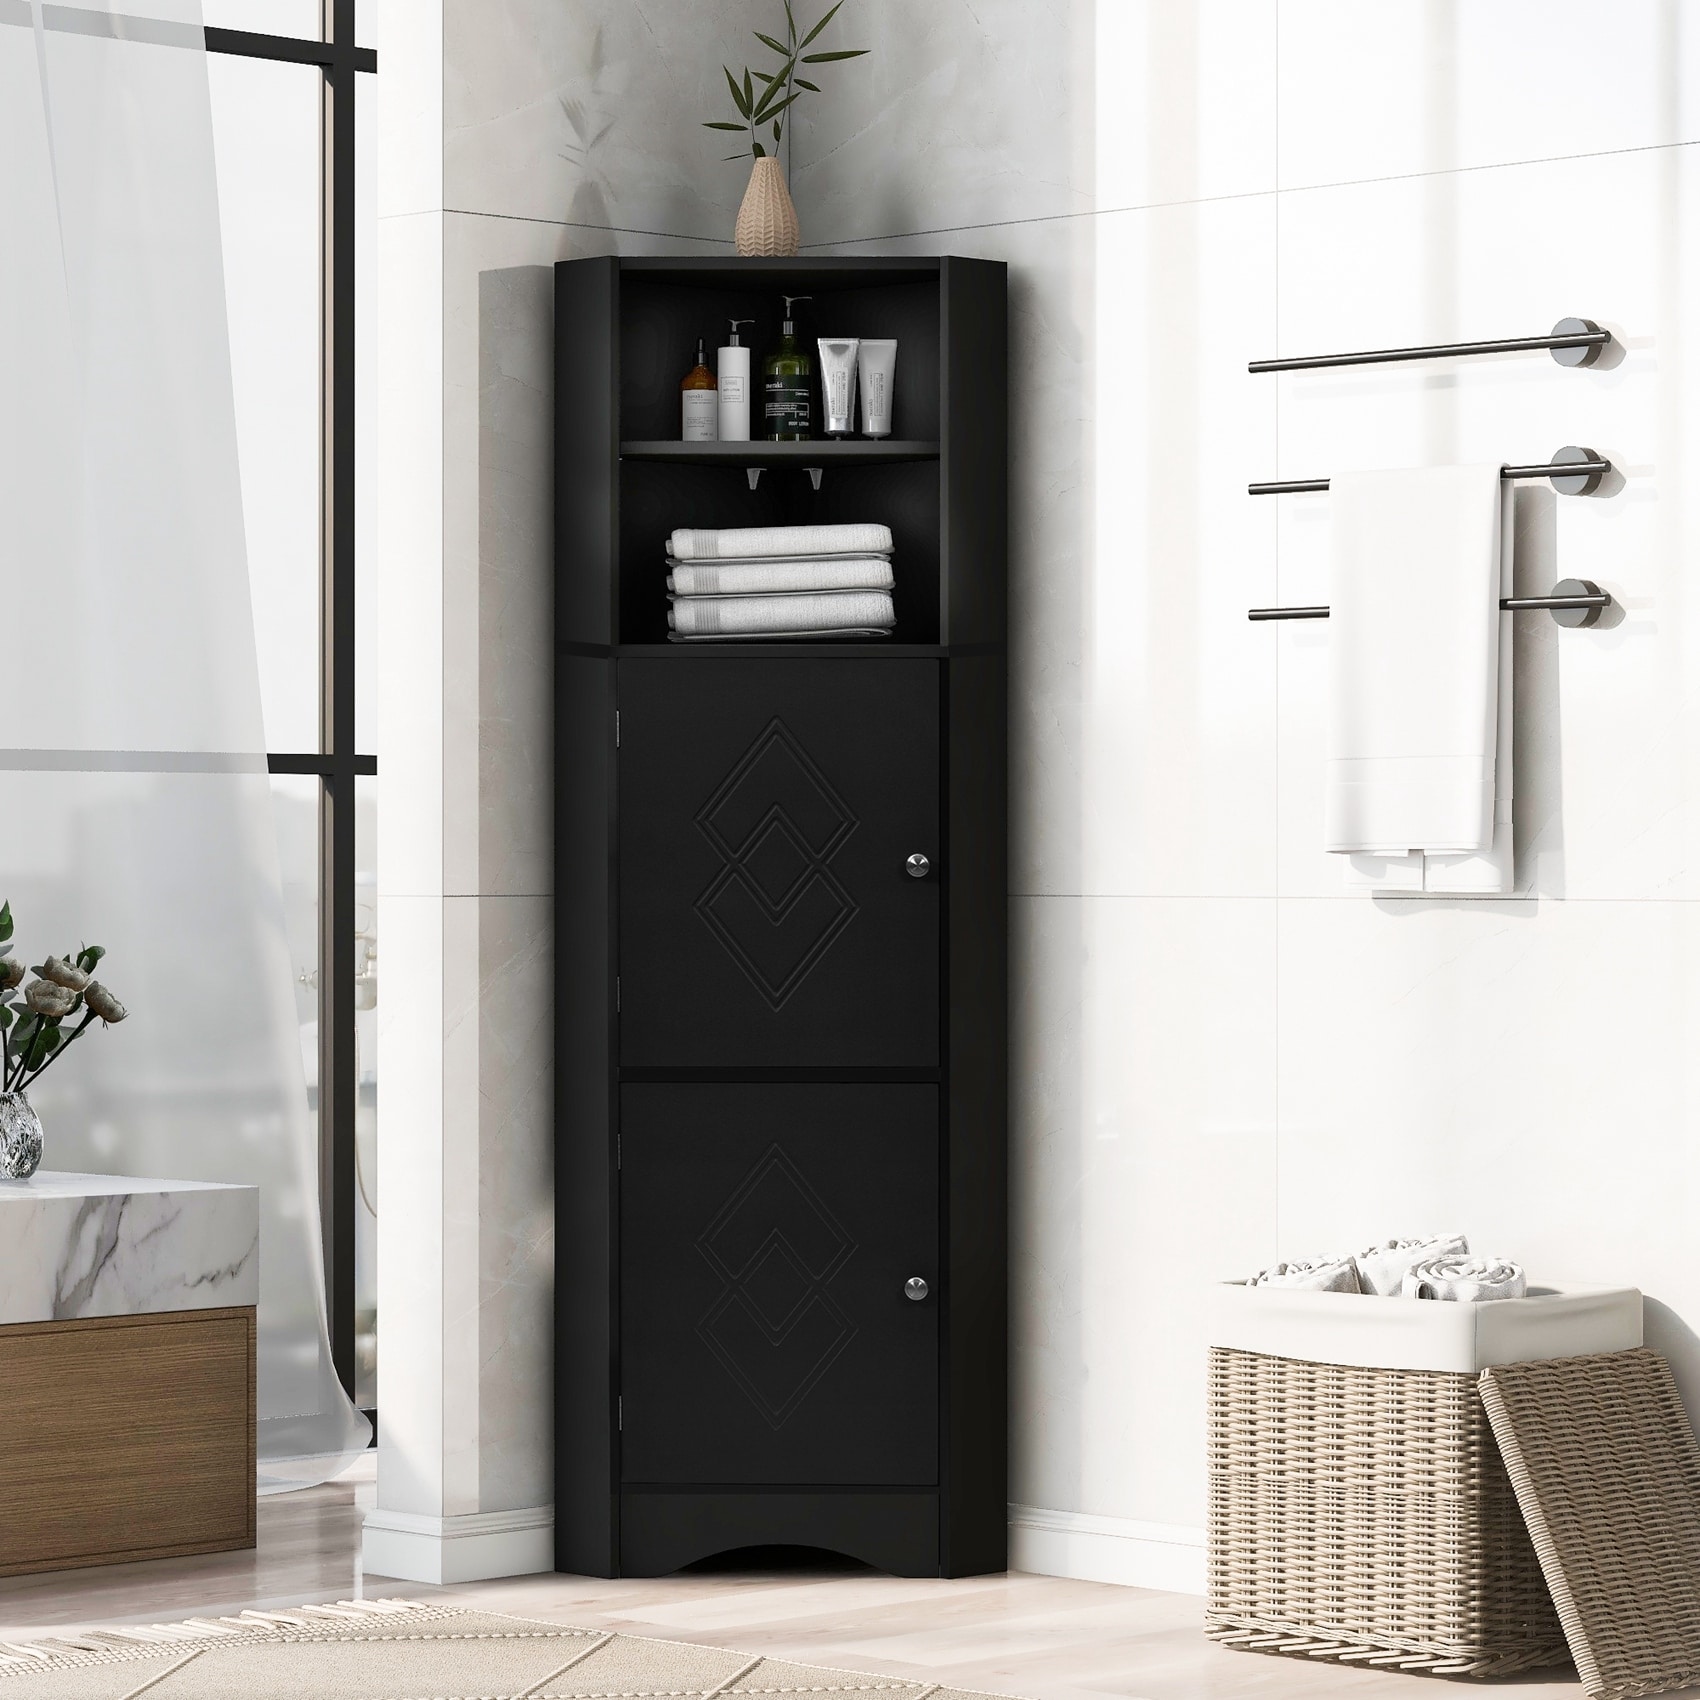 https://ak1.ostkcdn.com/images/products/is/images/direct/3f781ef725a727d29c8d14183980797834fcf011/Tall-Bathroom-Corner-Cabinet.jpg